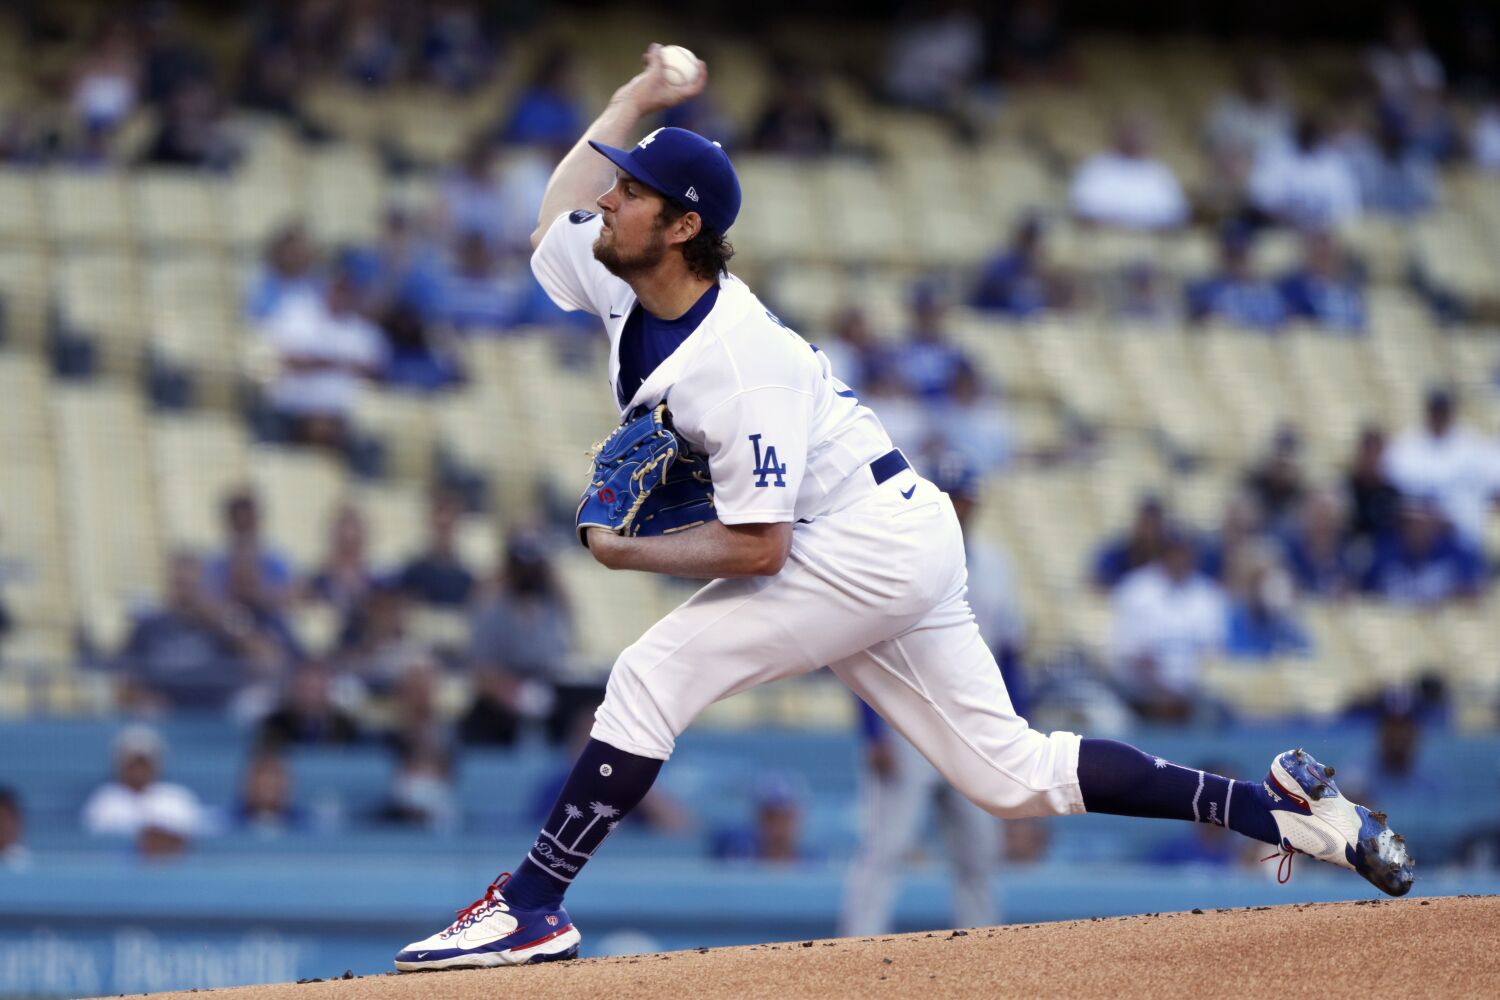 Hernández: Dodgers lost big on their Trevor Bauer bet. Will the number crunchers save them?